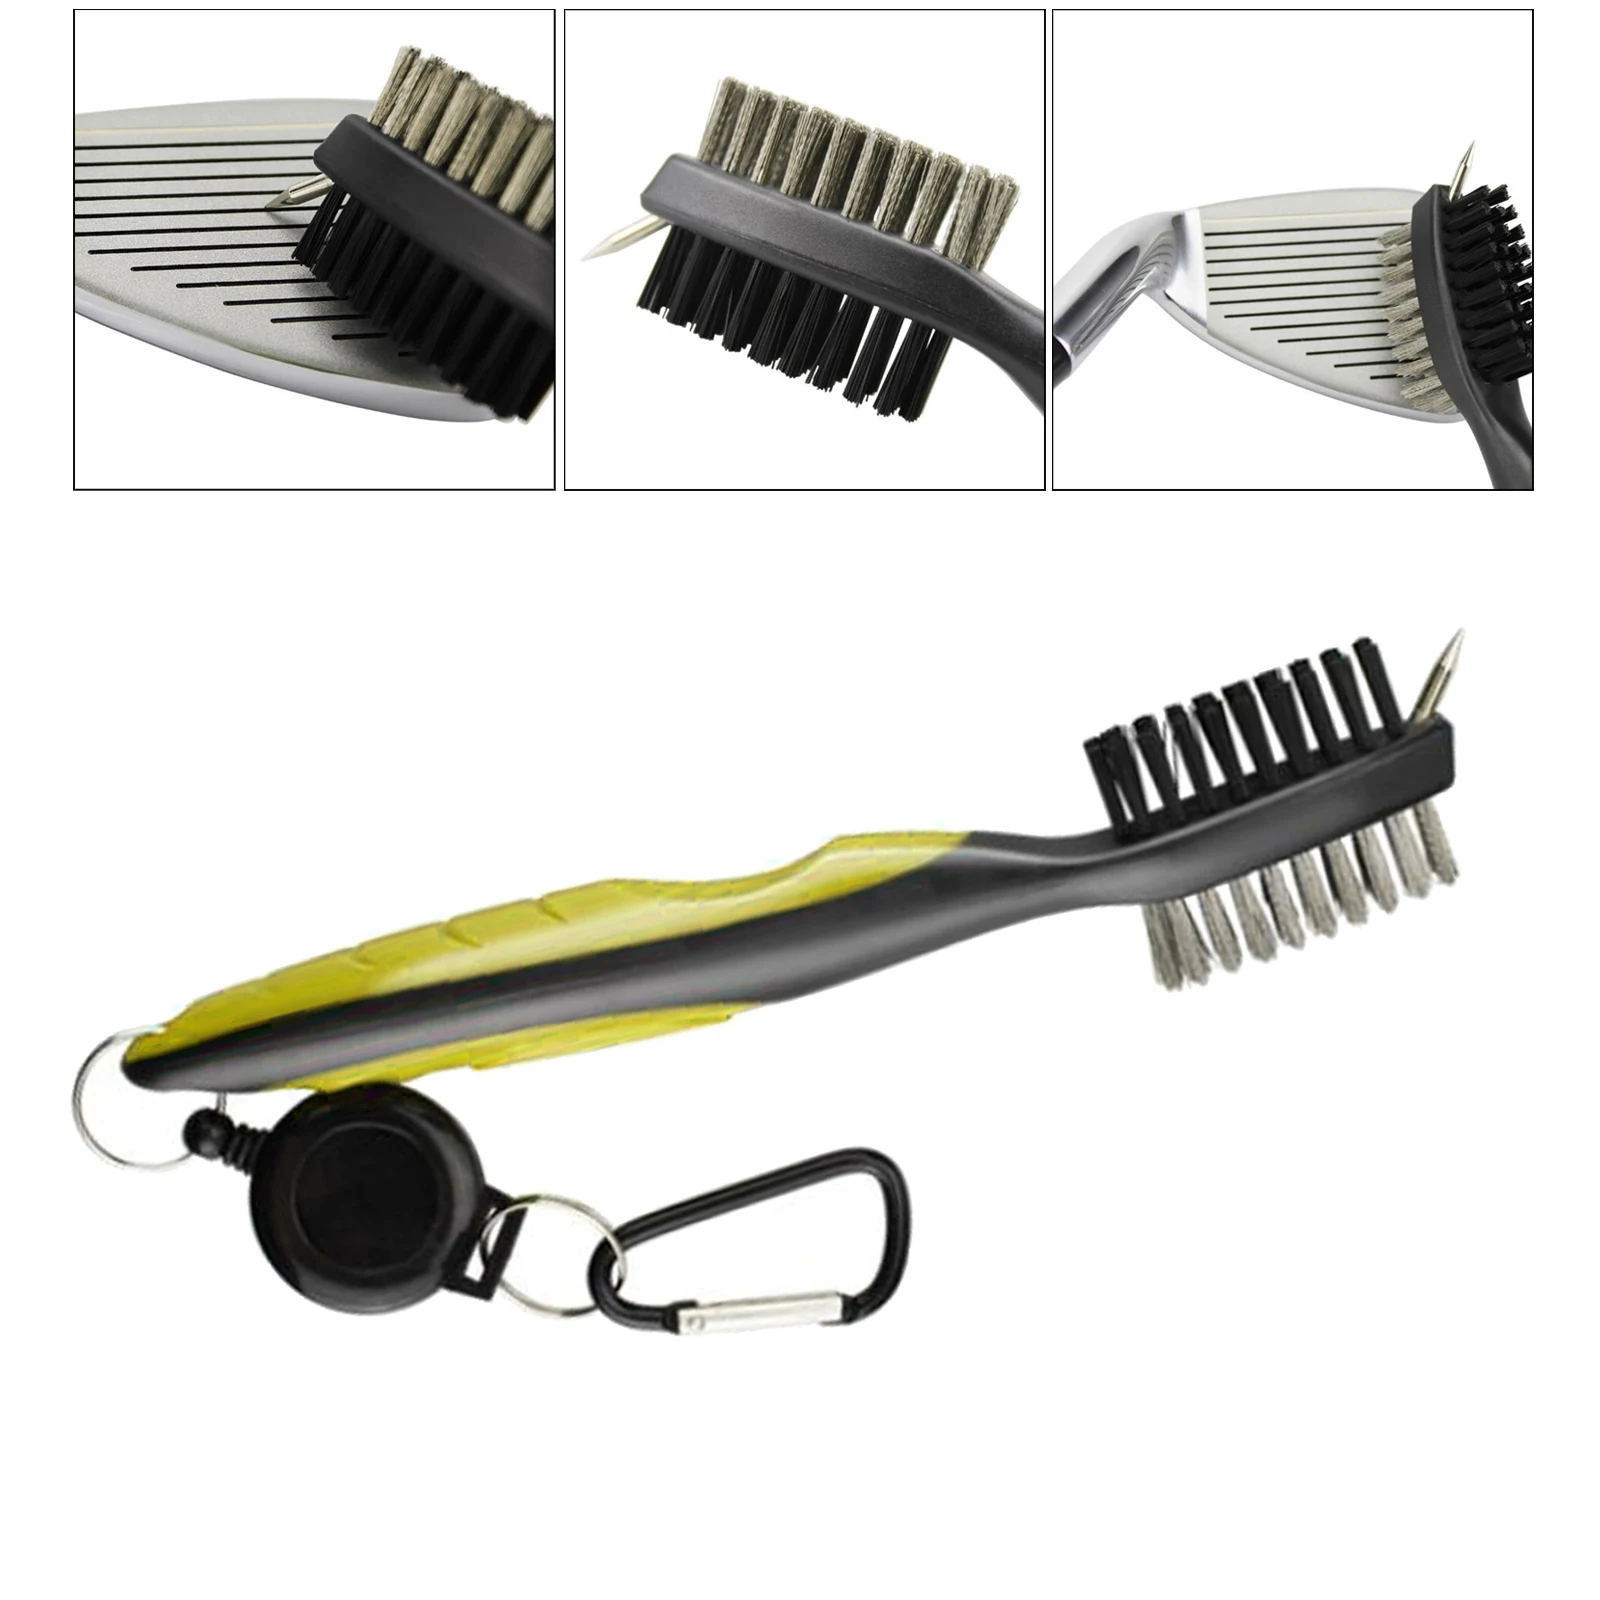 Golf Club Brush Golf Groove Cleaning Brush 2 Sided Golf Putter Wedge Ball Groove Cleaner Kit Cleaning Tool Golf Accessories